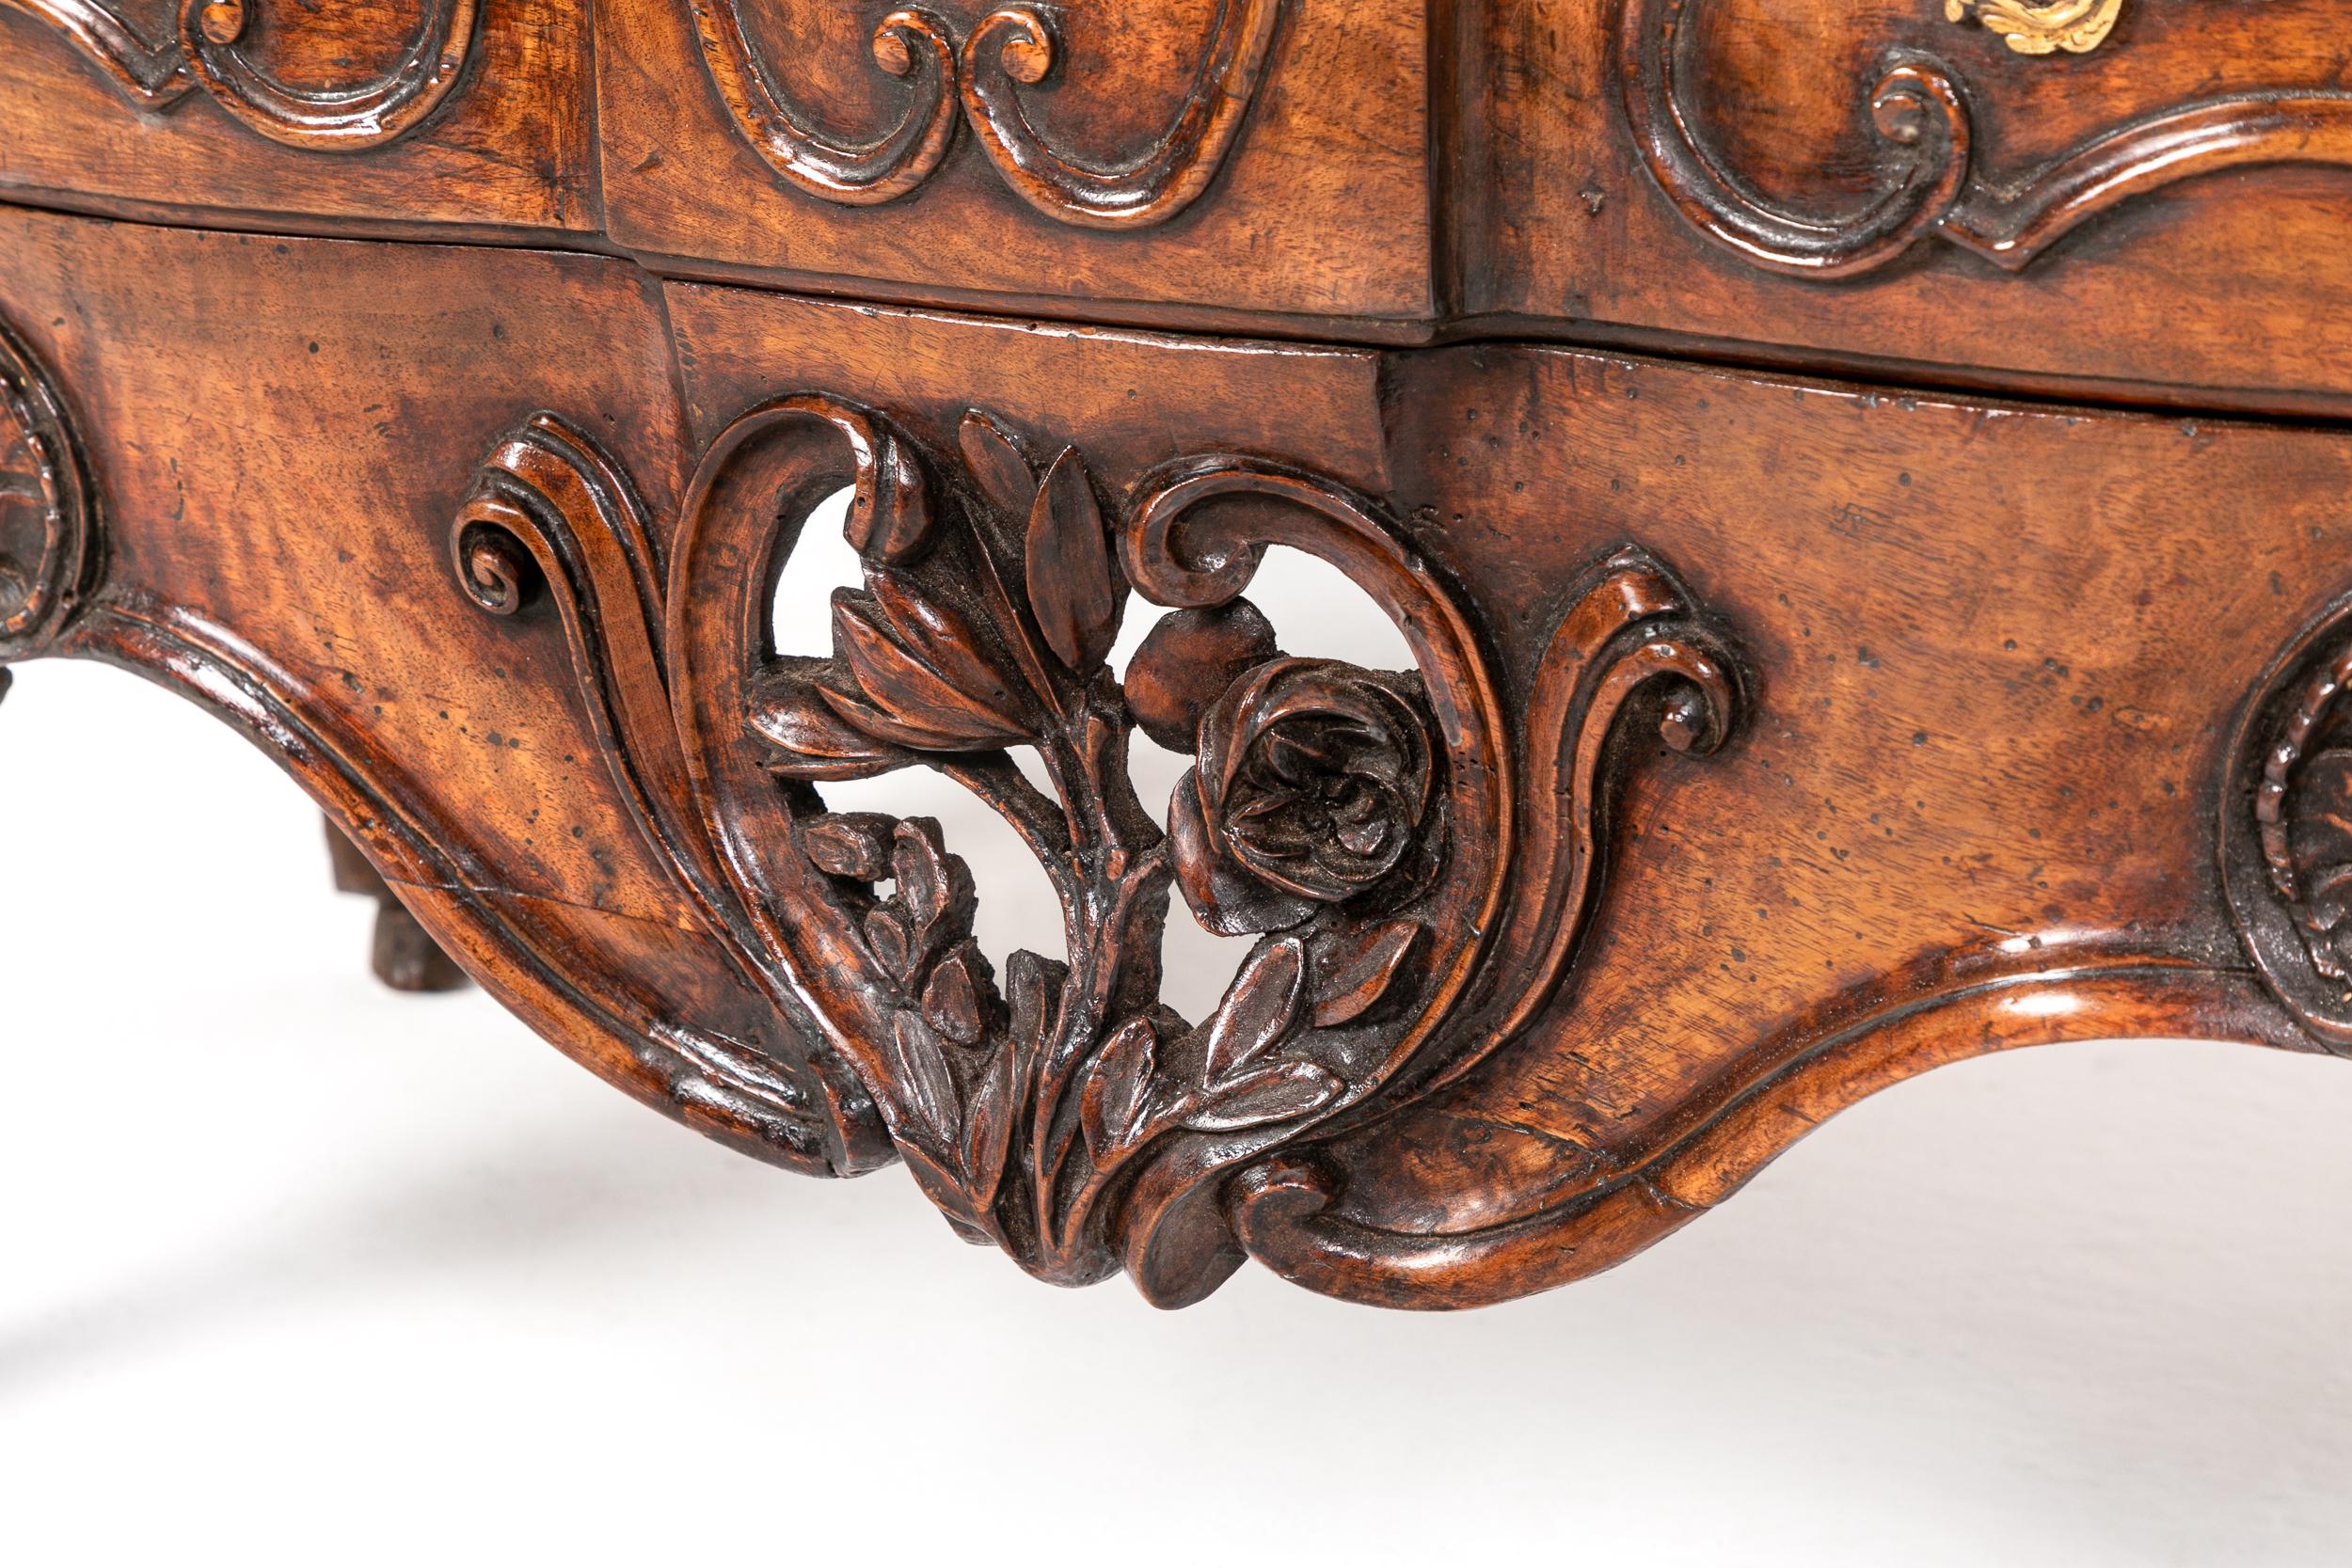 An attractive, 18th century solid walnut commode of the Louis XV period. Having moulded top, and curved sides, with a slight serpentine front. Two drawers with elaborate handles within panels of hand-carved decoration. At the centre is an elaborate